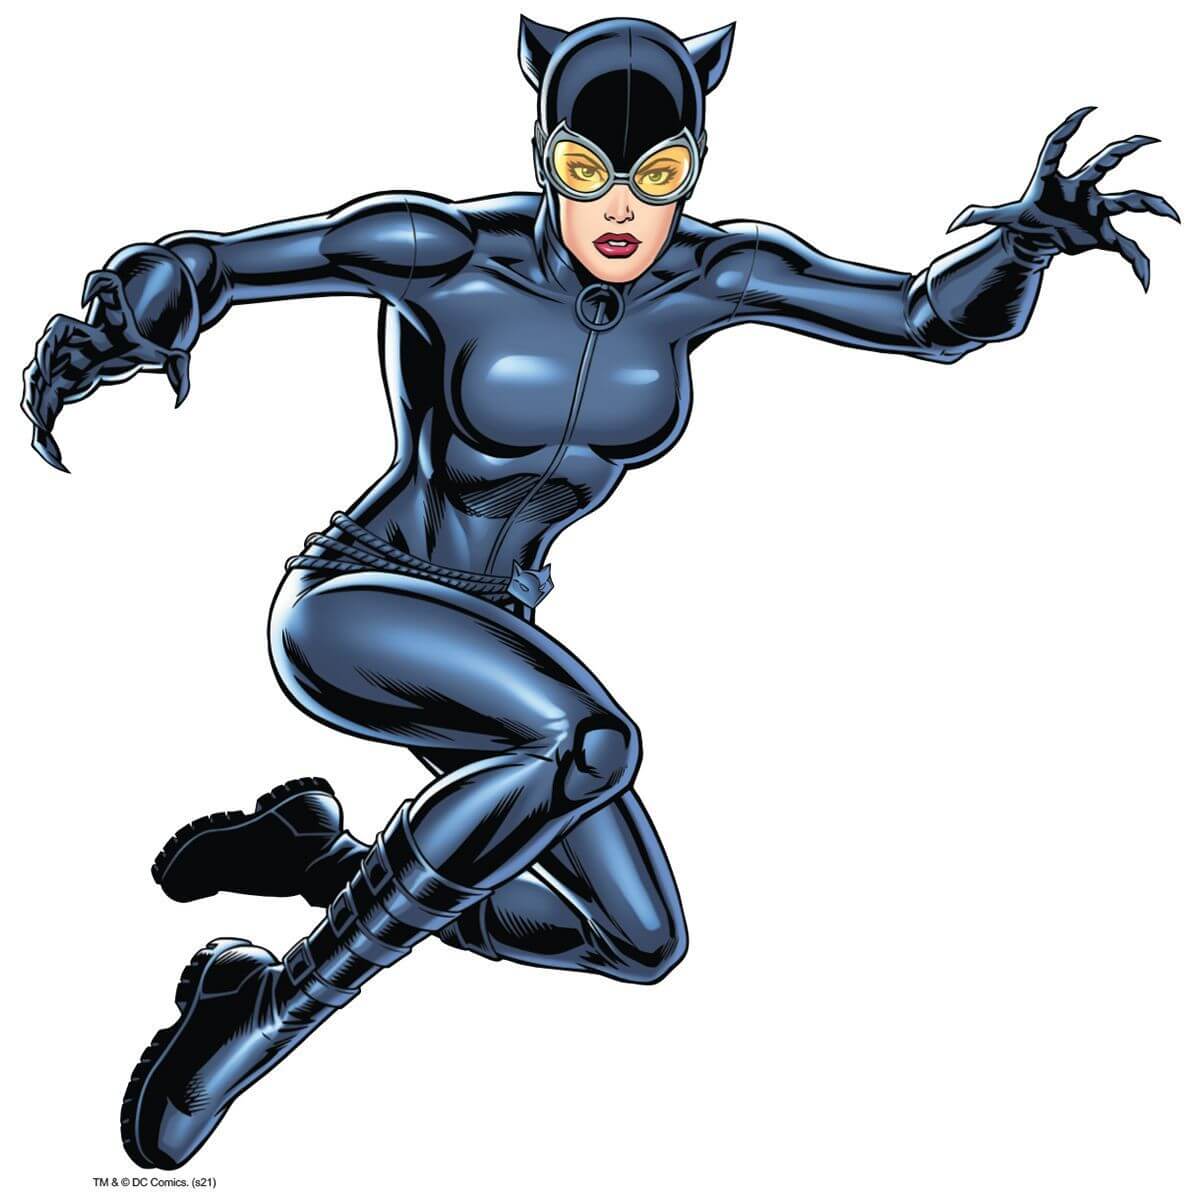 Kismet Decals Catwoman Leap Attack Licensed Wall Sticker - Easy DIY Justice League Home & Room Decor Wall Art - Kismet Decals